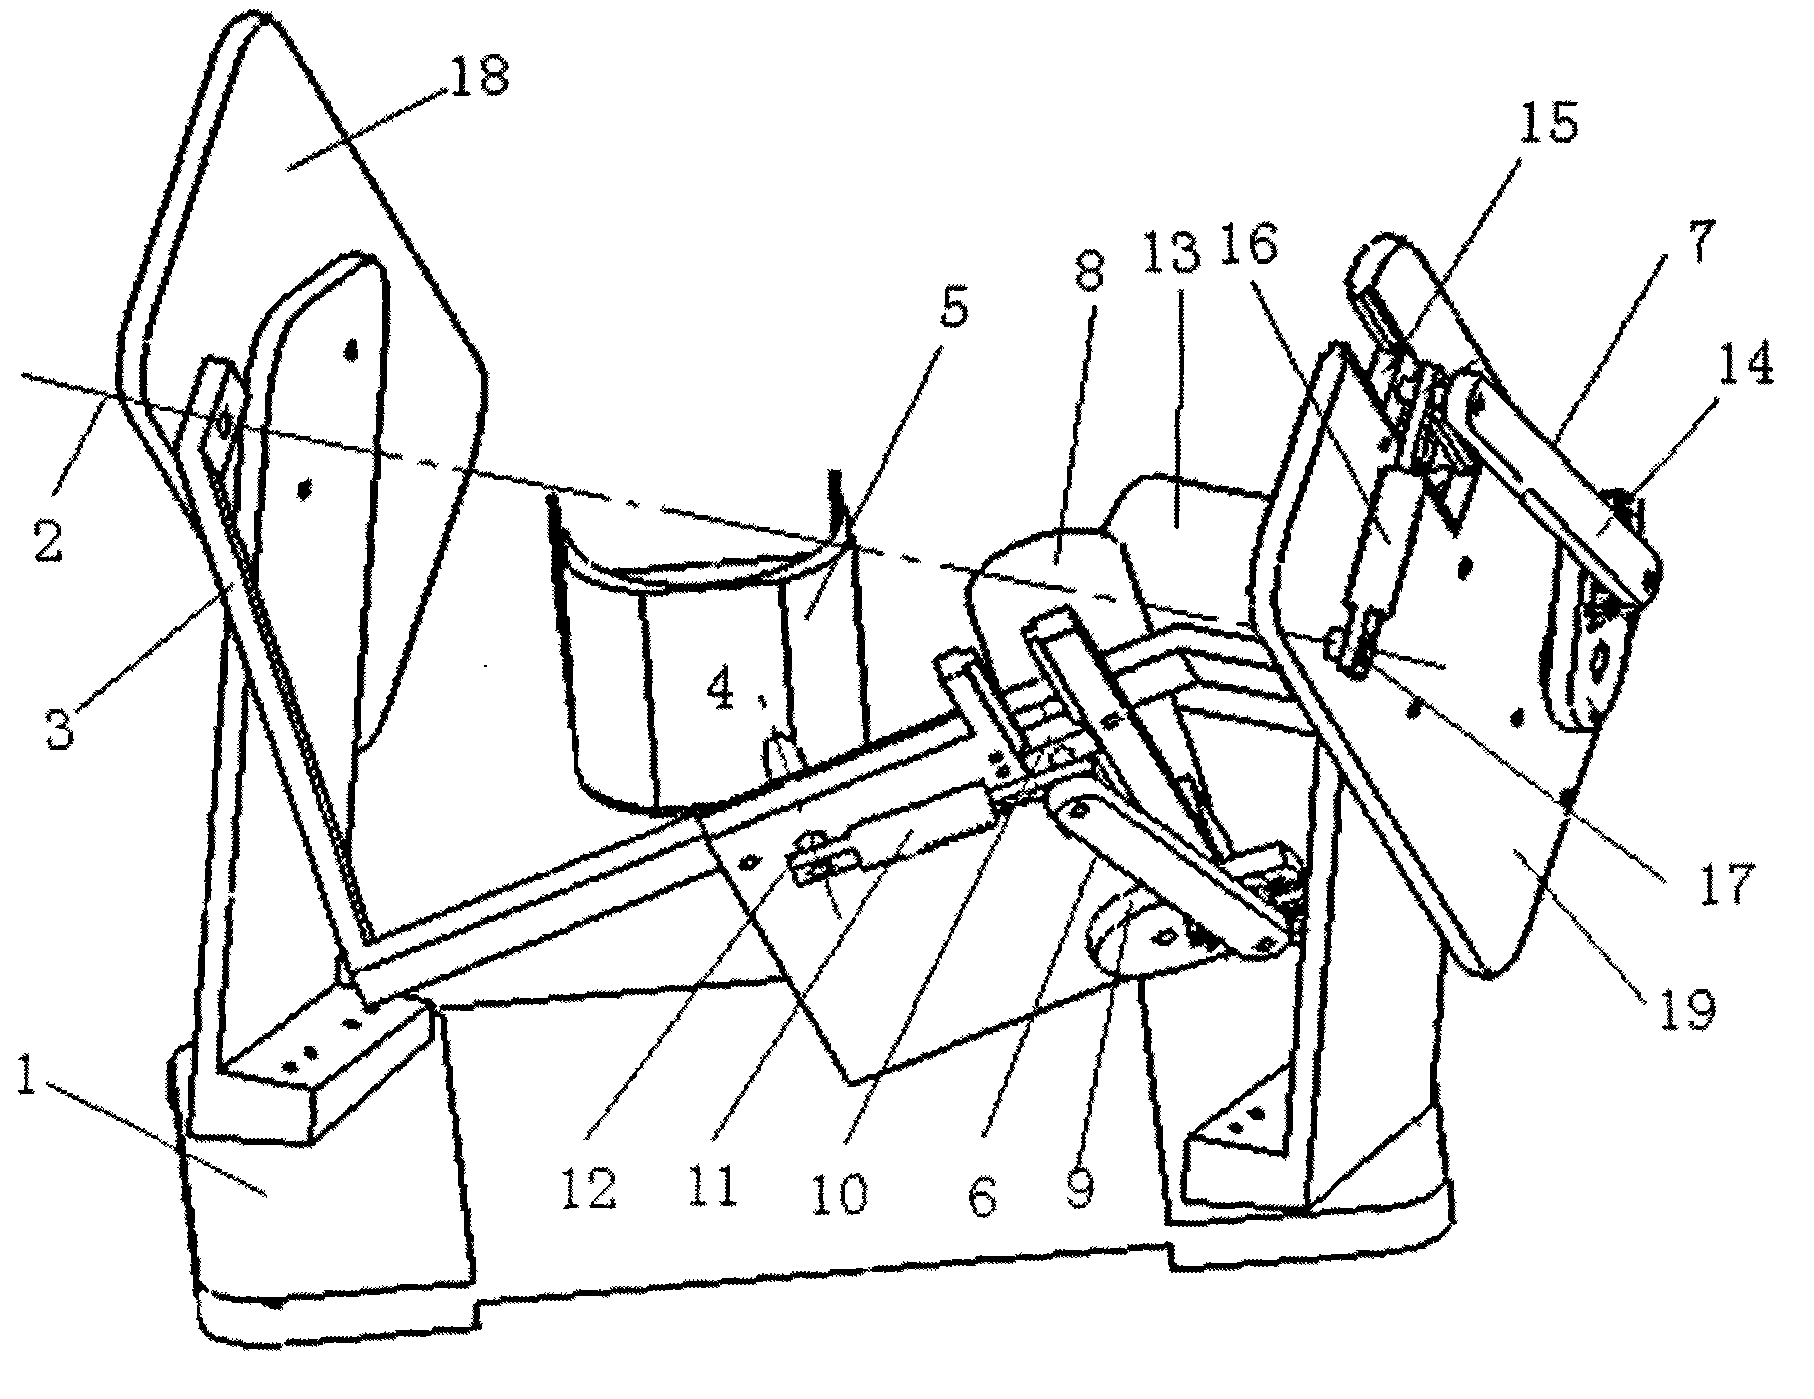 Ankle rehabiliation apparatus with double-freedom degree